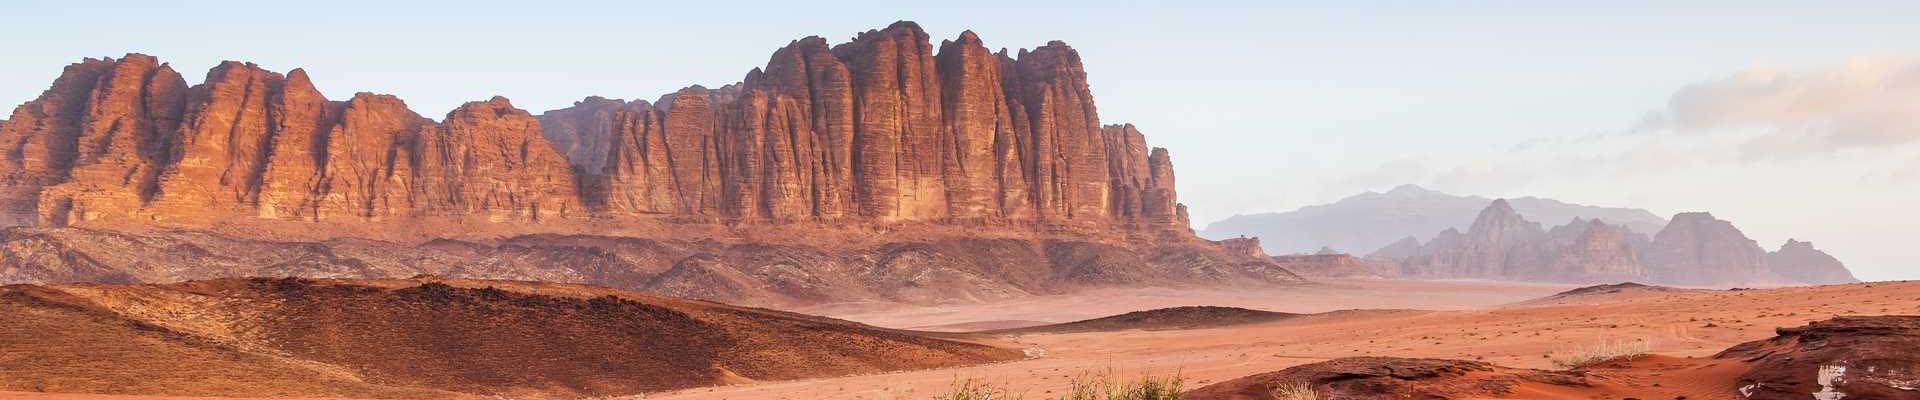 Embark on an Unforgettable Jordan Classical Tour with Go Jordan Travel and Tourism